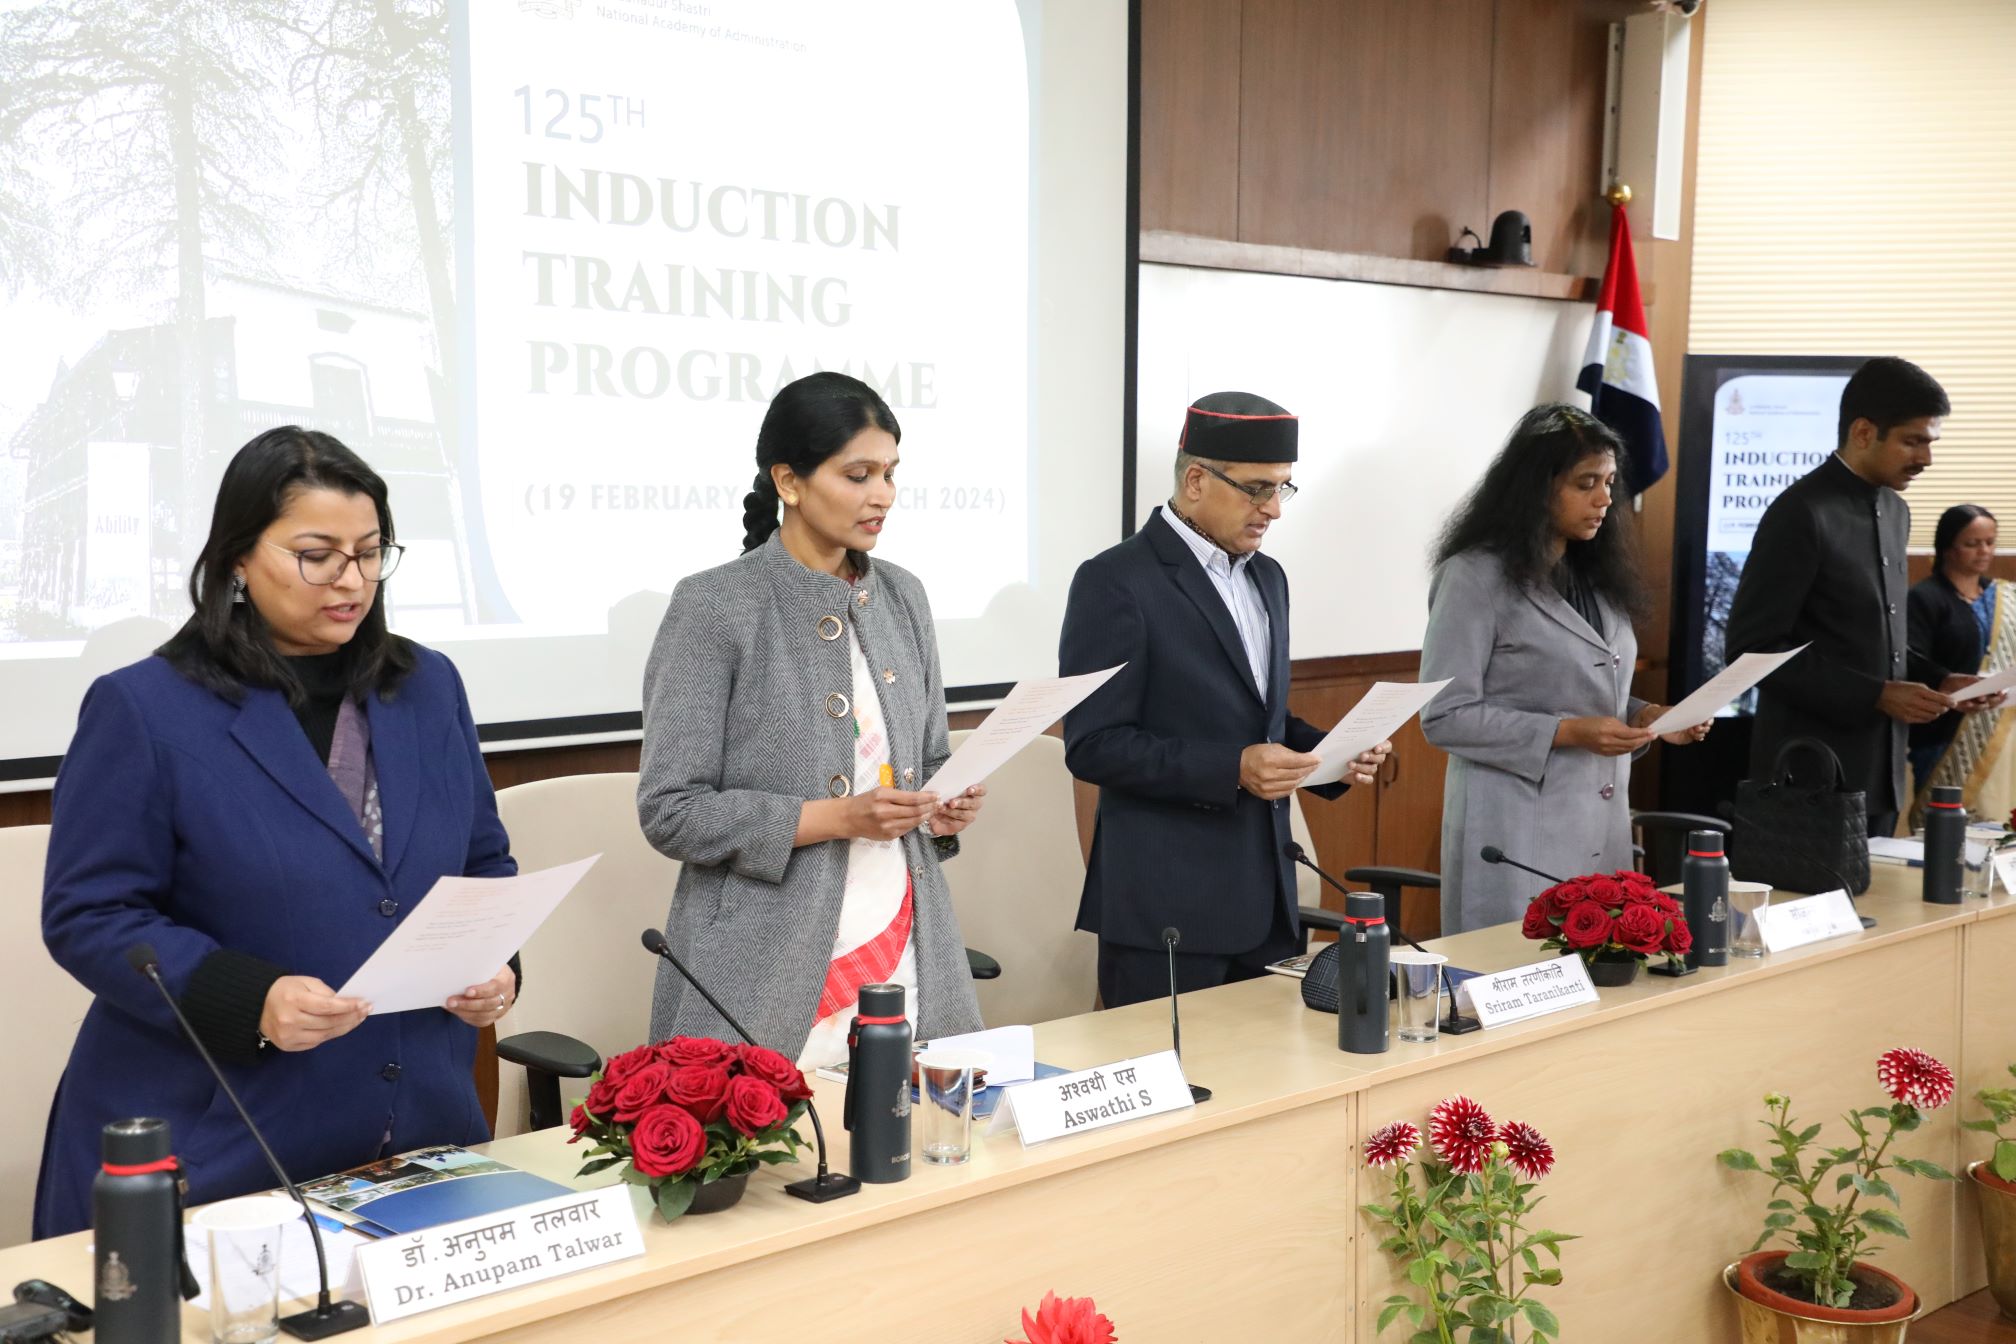 Inaugural program of 125th Induction Training Programme 19th Feburary to 29th March, 2024 for officers promoted from SCS/select list to IAS